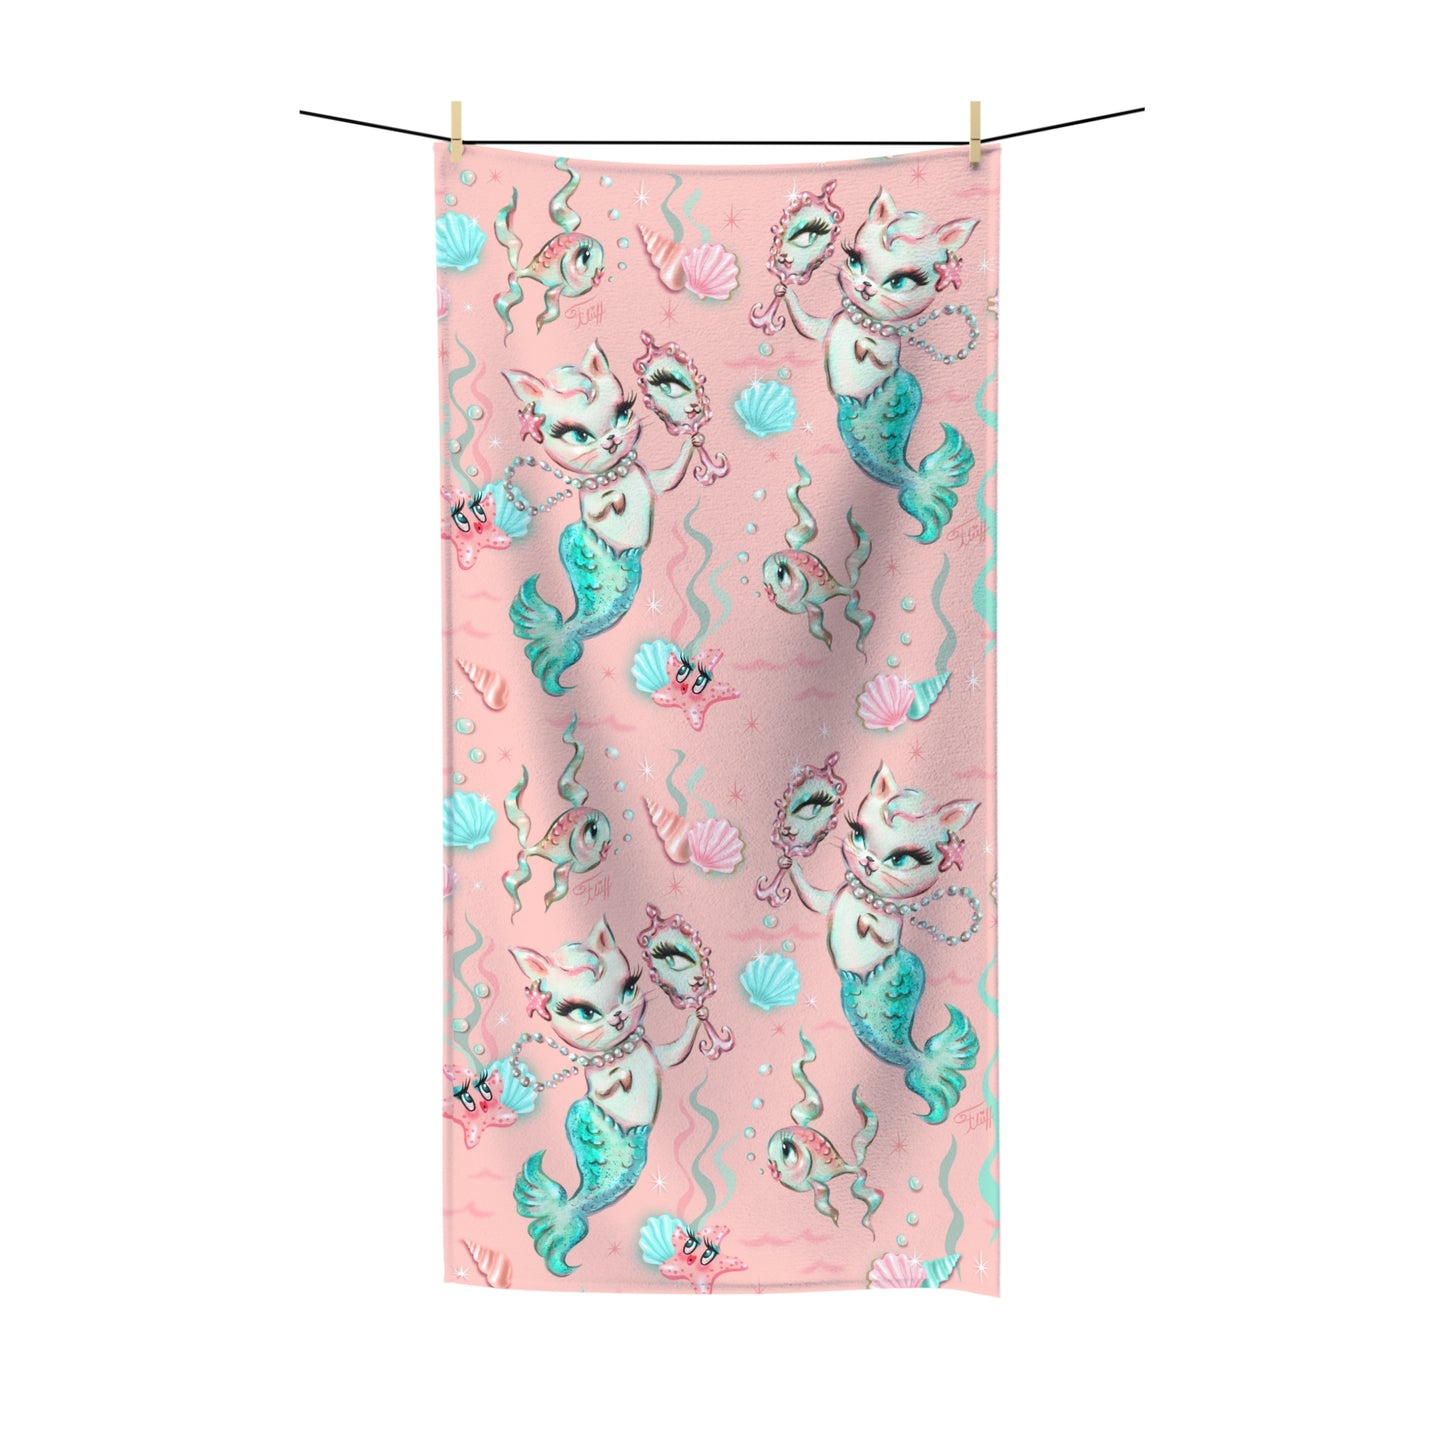 Merkittens with Pearls Blush • Towel